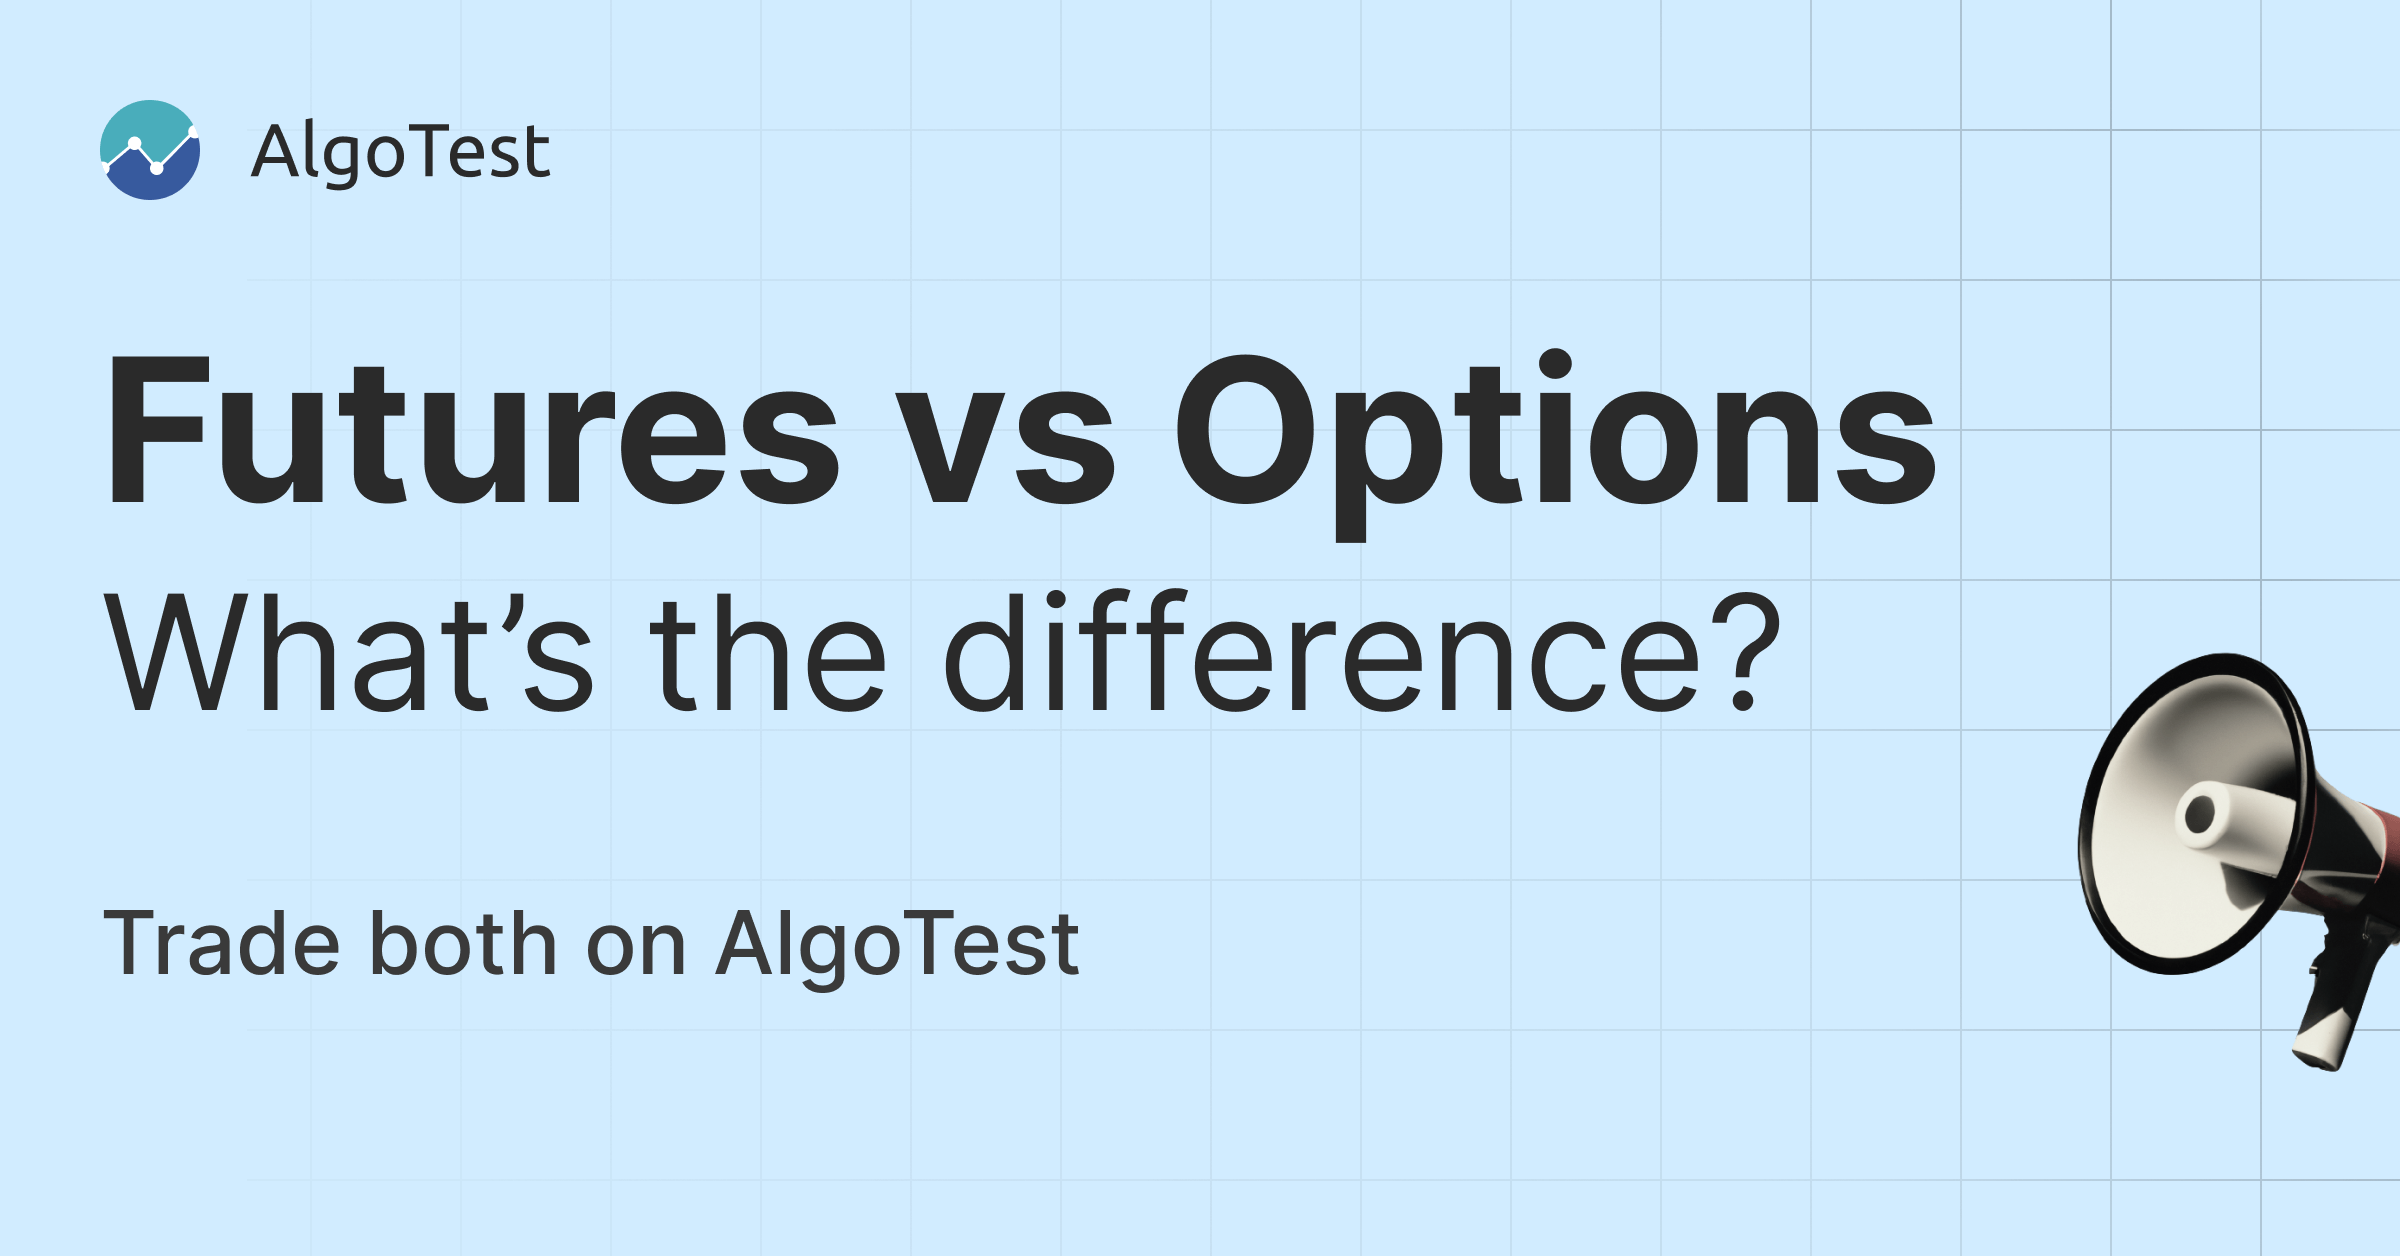 Futures vs options. What's the right financial product for you?